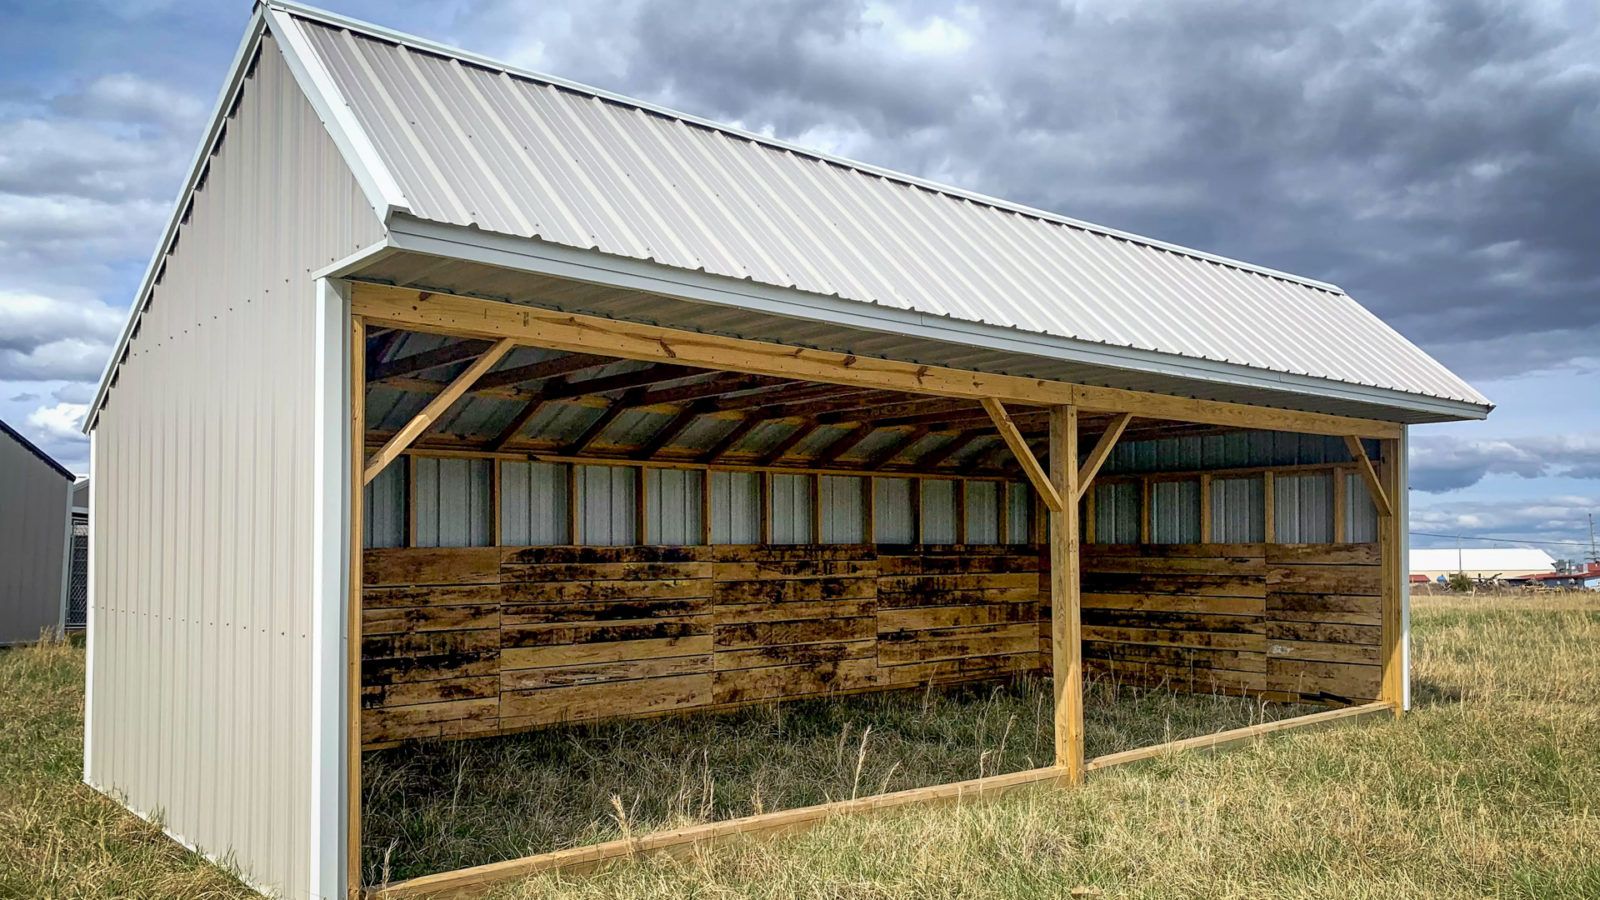 14x20 Sheds The Best Guide Eshs Utility Buildings